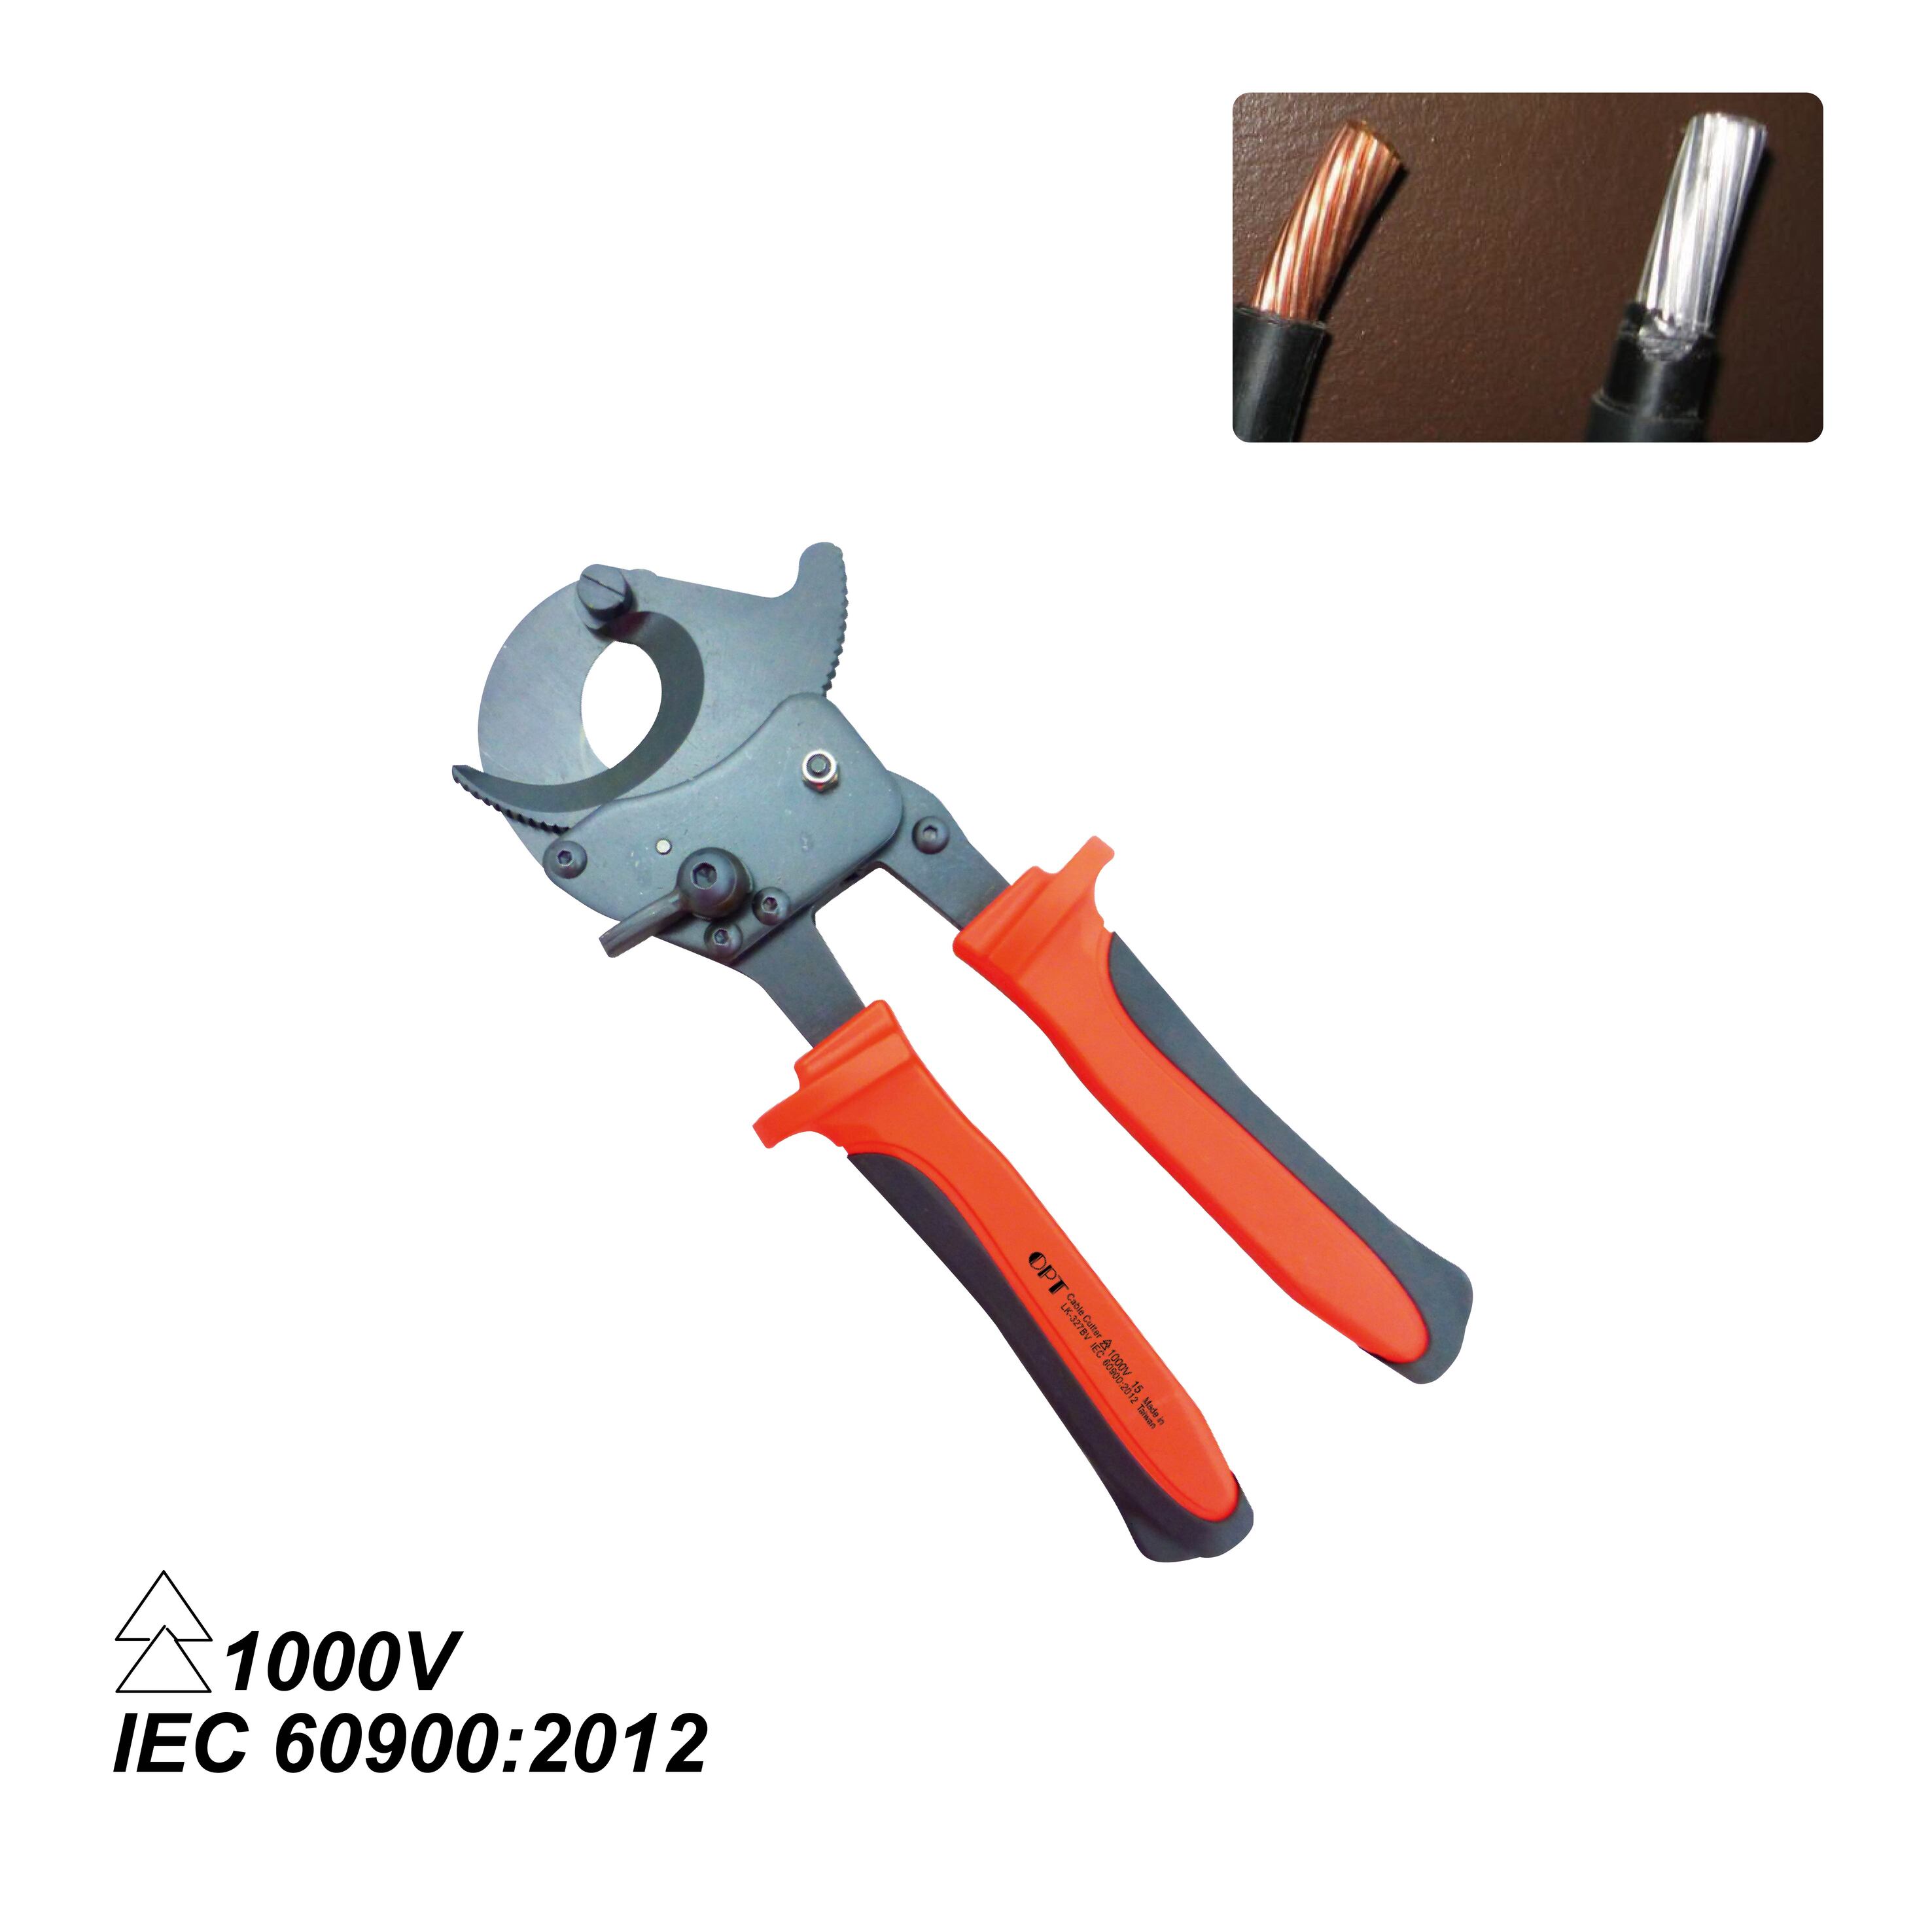 LK-327BV HAND CABLE CUTTERS-LK-327BV 